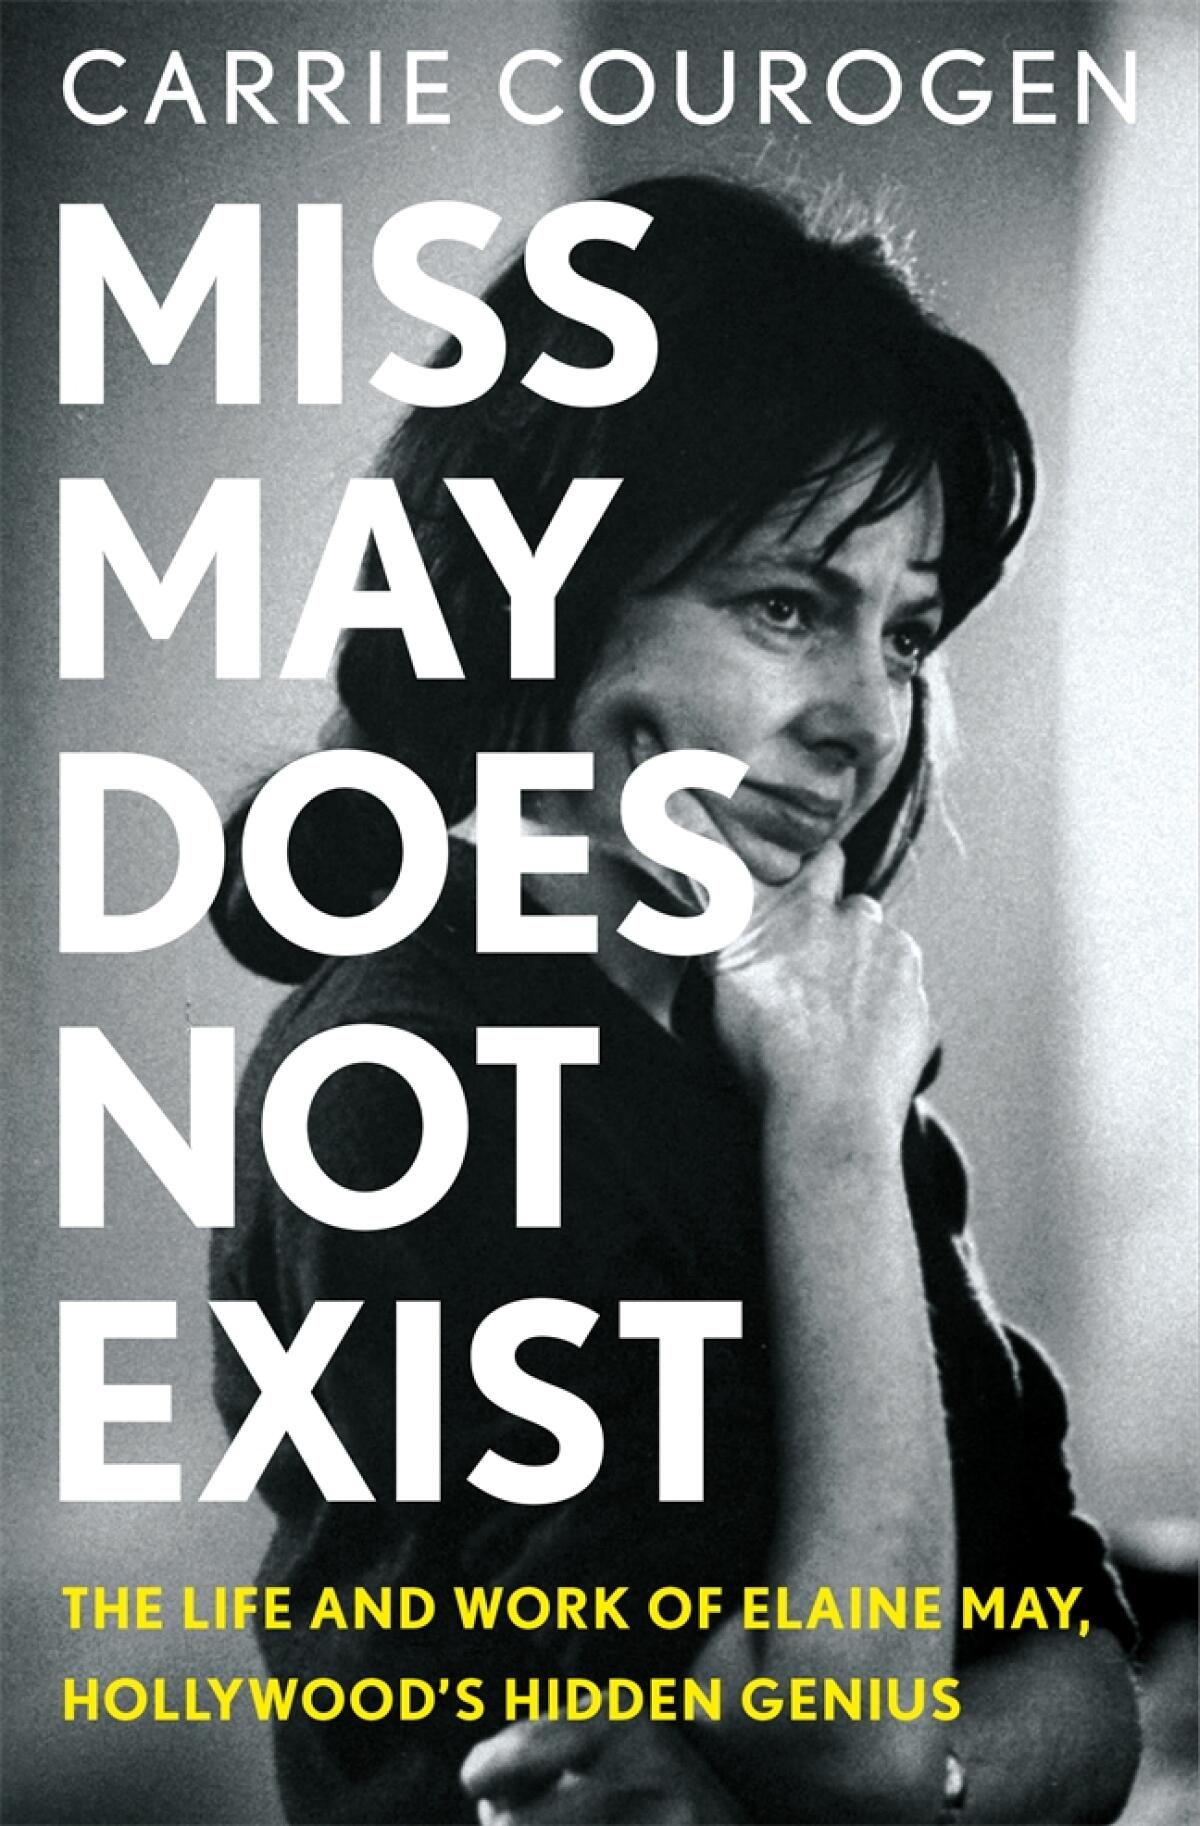 "Miss May Does Not Exist" by Carrie Courogen